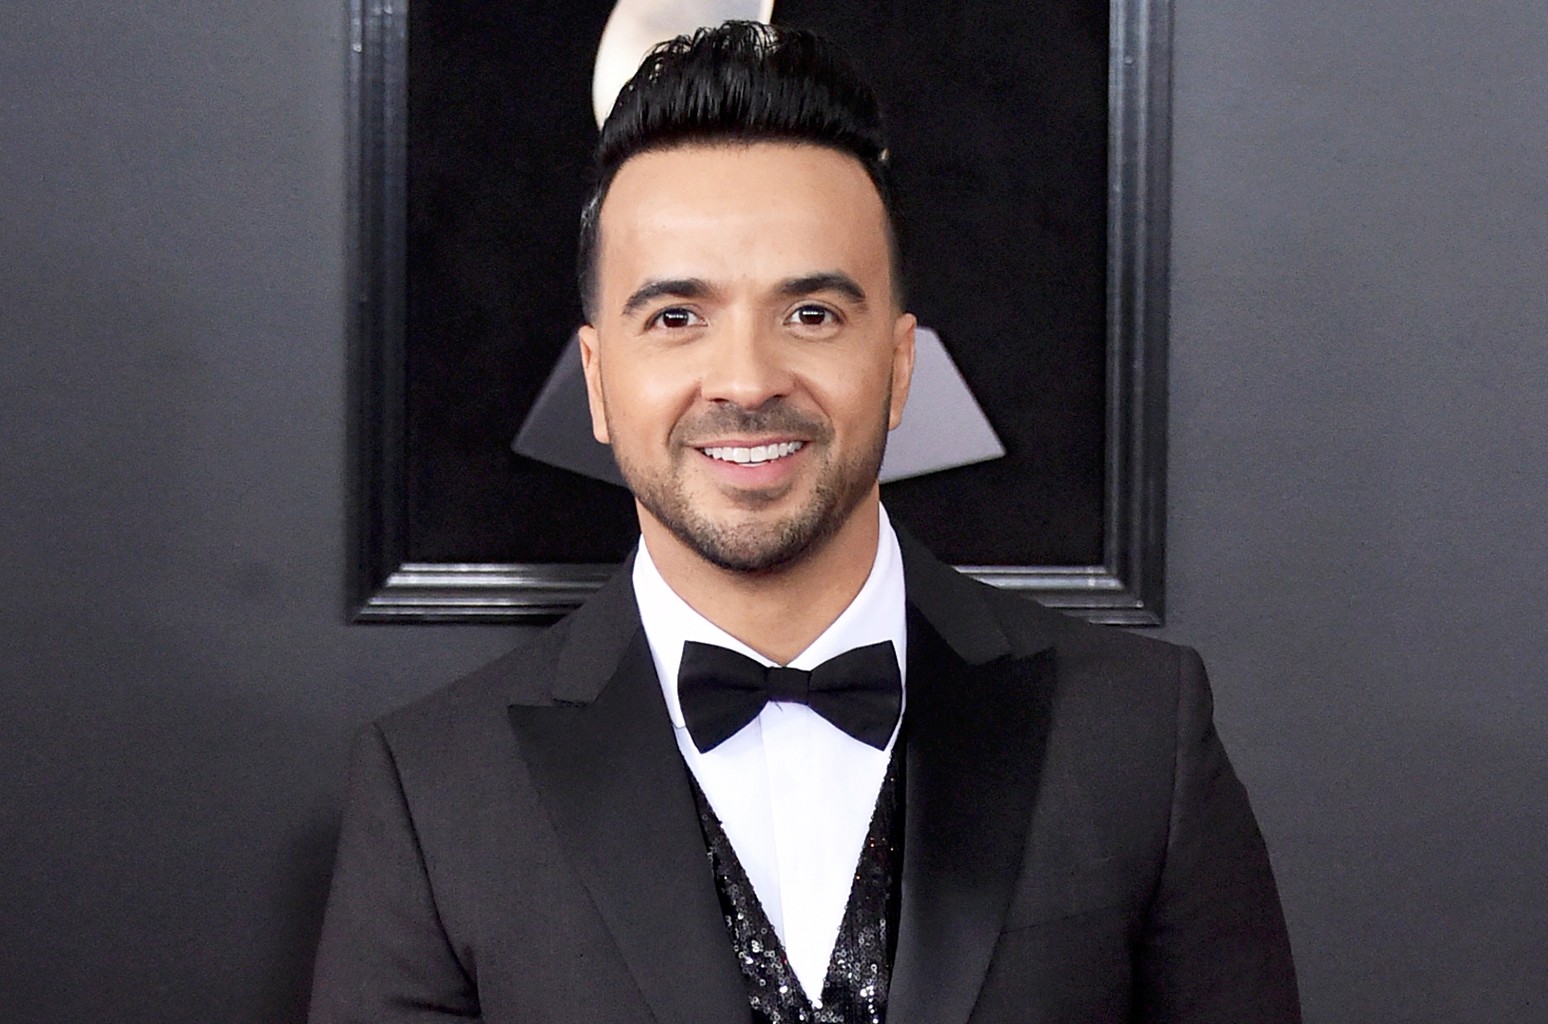 42 Facts About Luis Fonsi - Facts.net